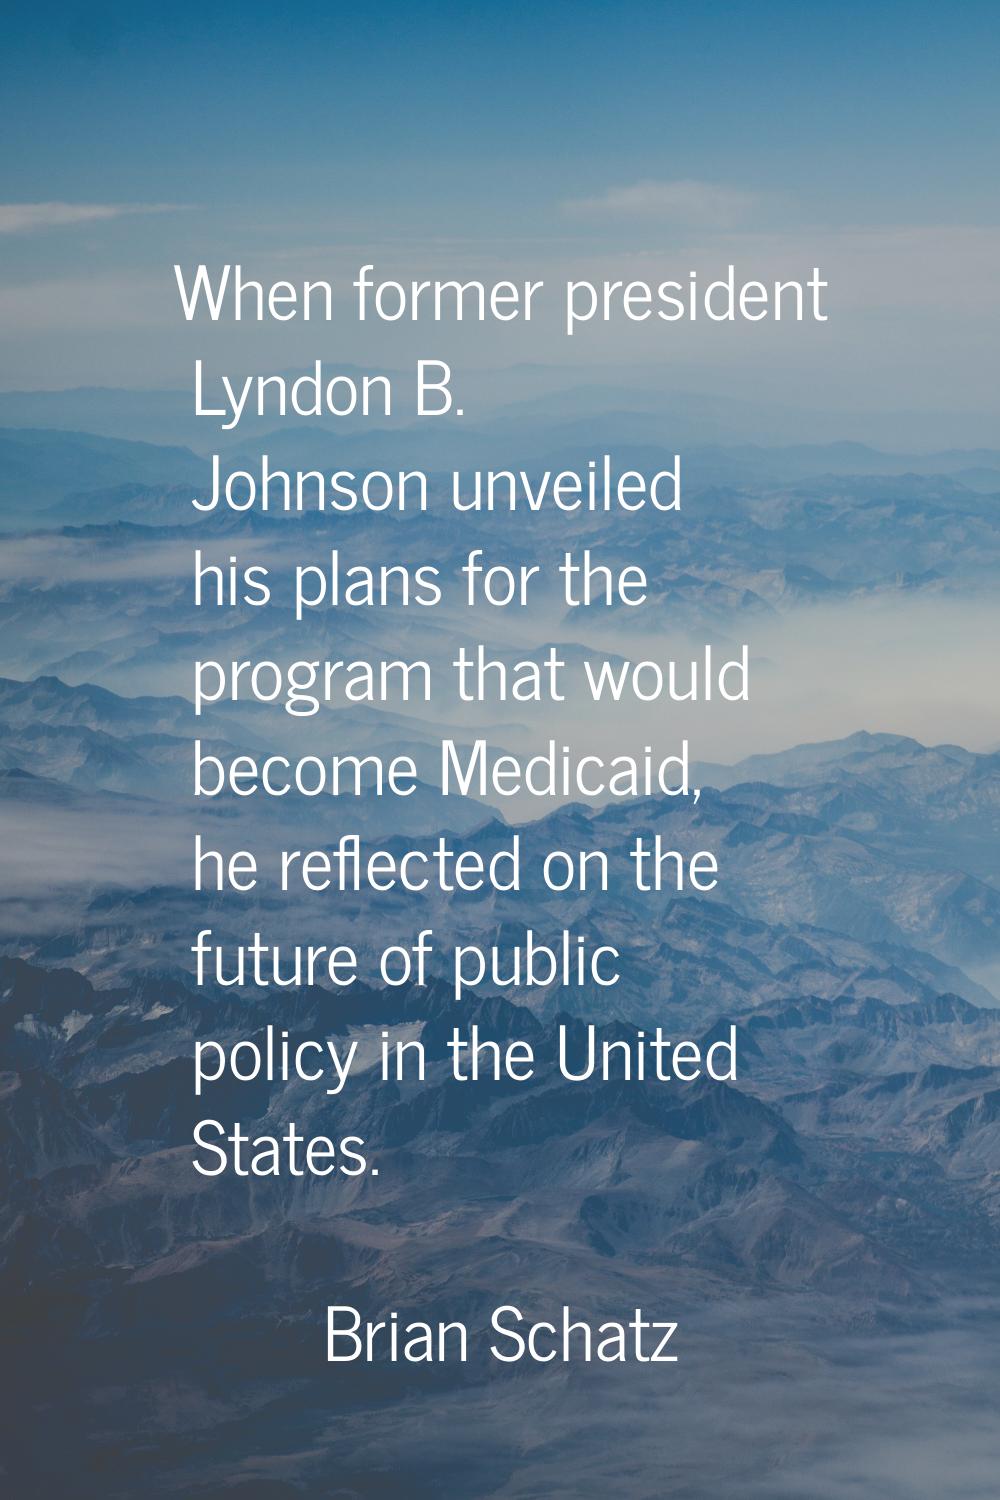 When former president Lyndon B. Johnson unveiled his plans for the program that would become Medica